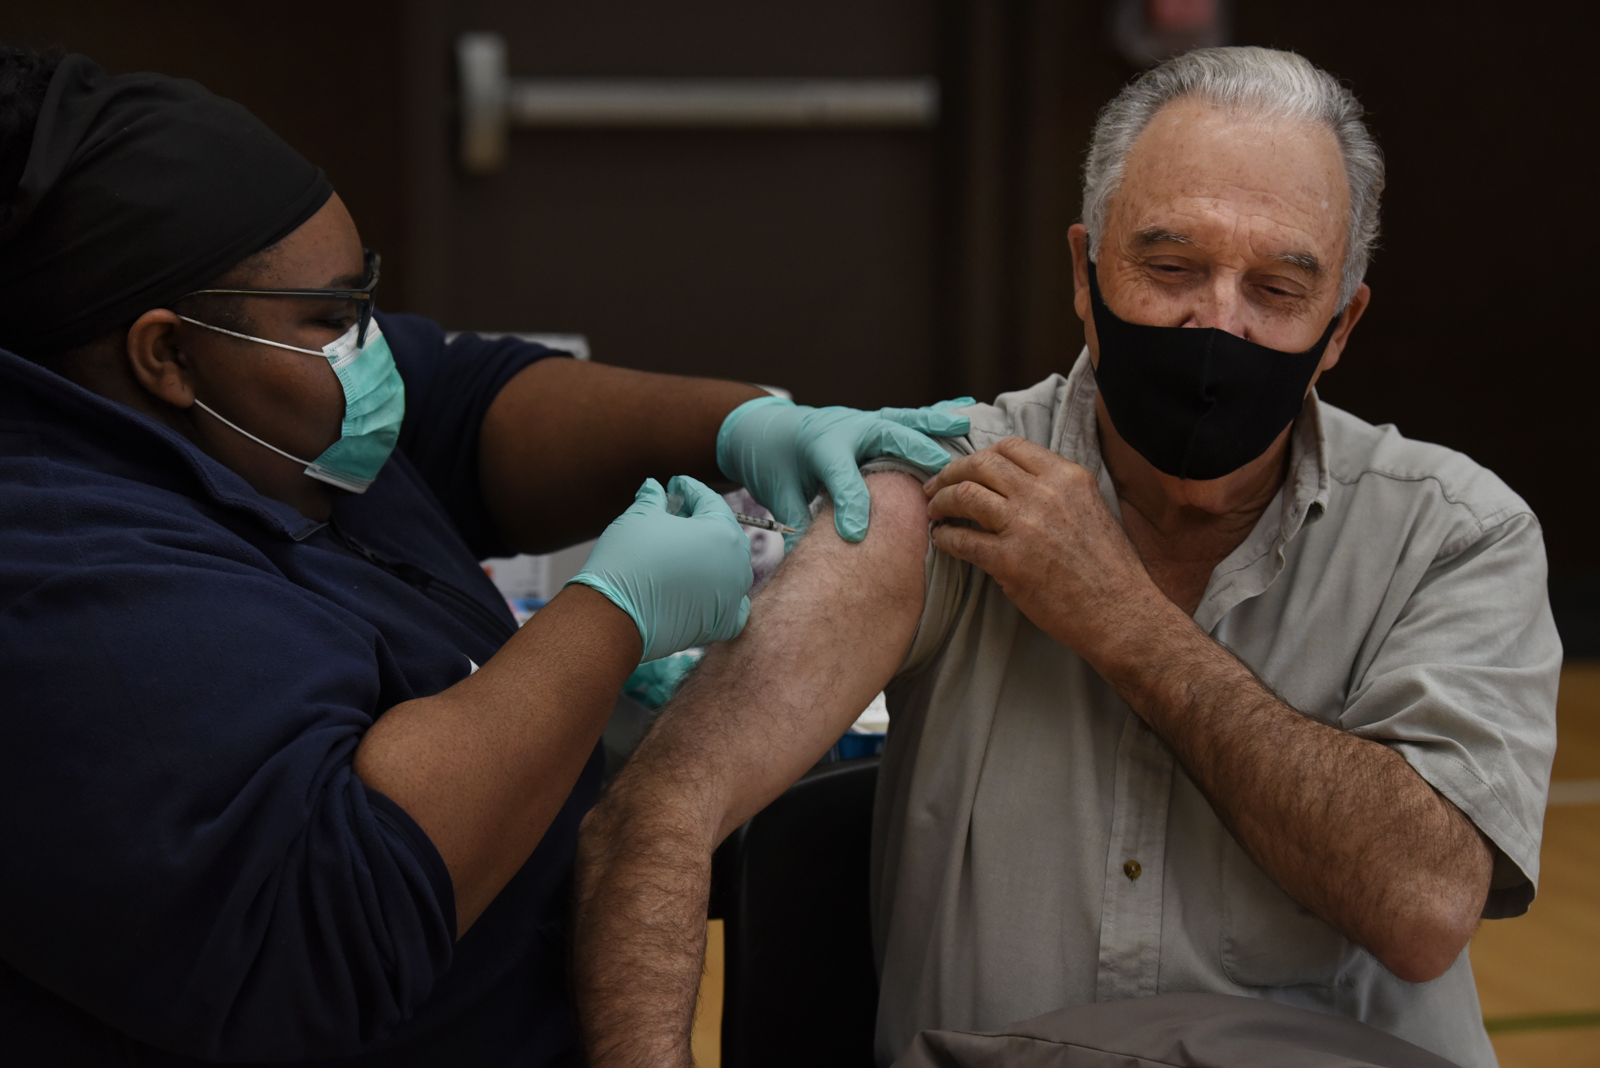 An elder community member lifts his shoulder sleeve as he receives a COVID-19 vaccine.